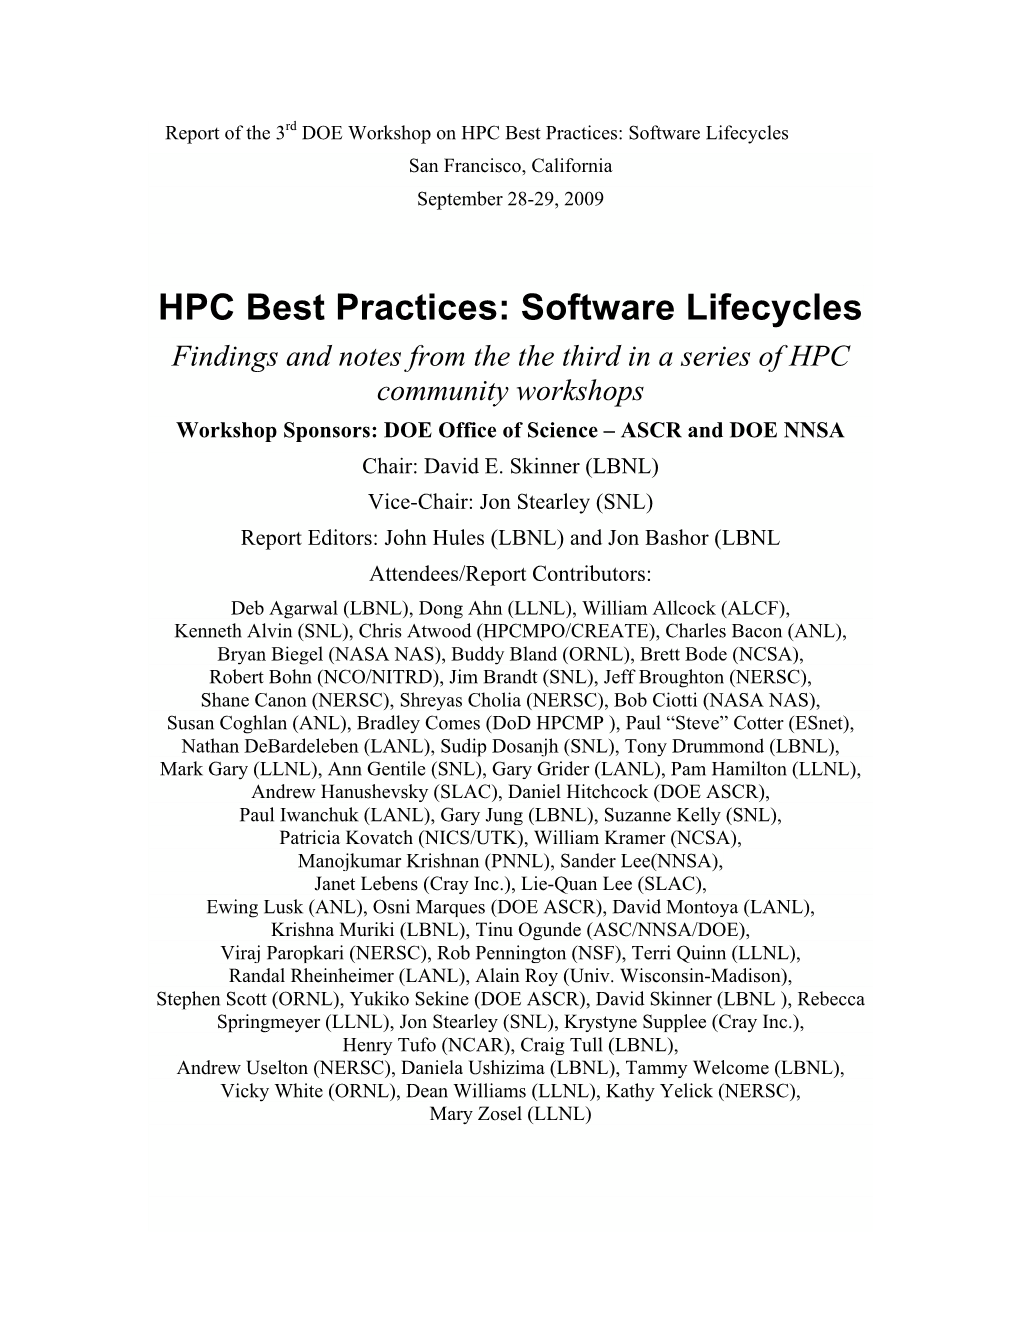 HPC Best Practices: Software Lifecycles San Francisco, California September 28-29, 2009